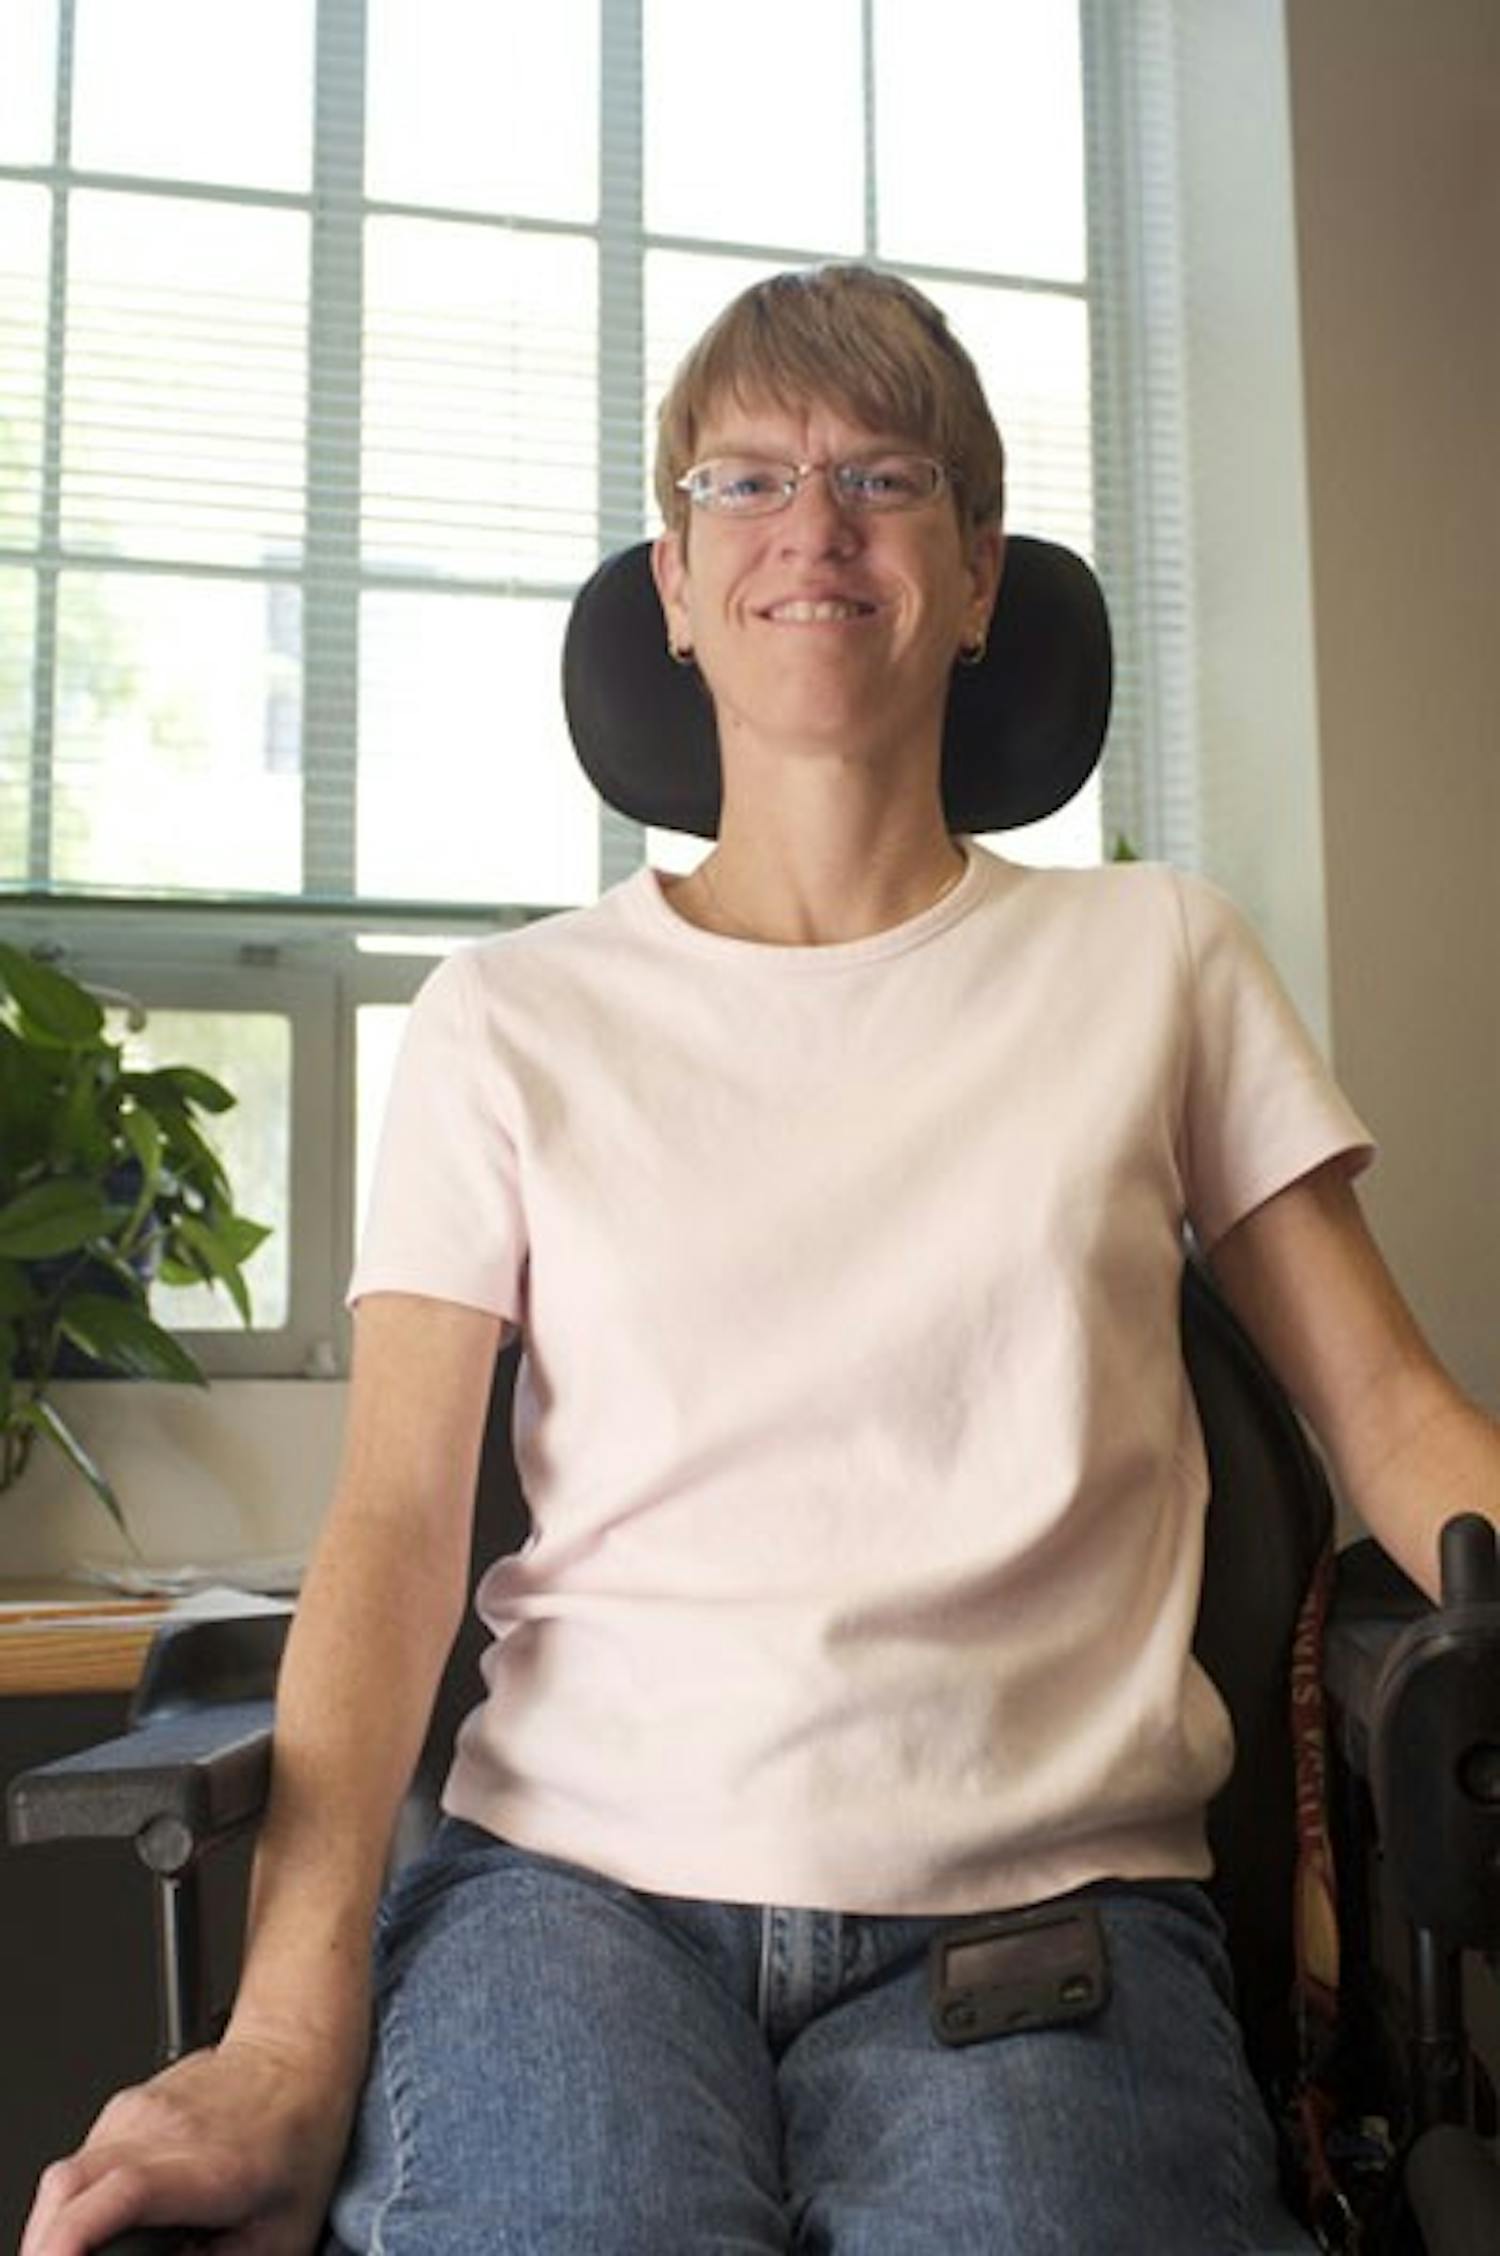 A HELPING HAND: Renae Hackman is the supervisor of testing accommodations at the ASU Disability Resource Center. Living with cerebral palsy, Hackman is an inspiration to the hundreds of students she helps each year. (Photo by Scott Stuk)